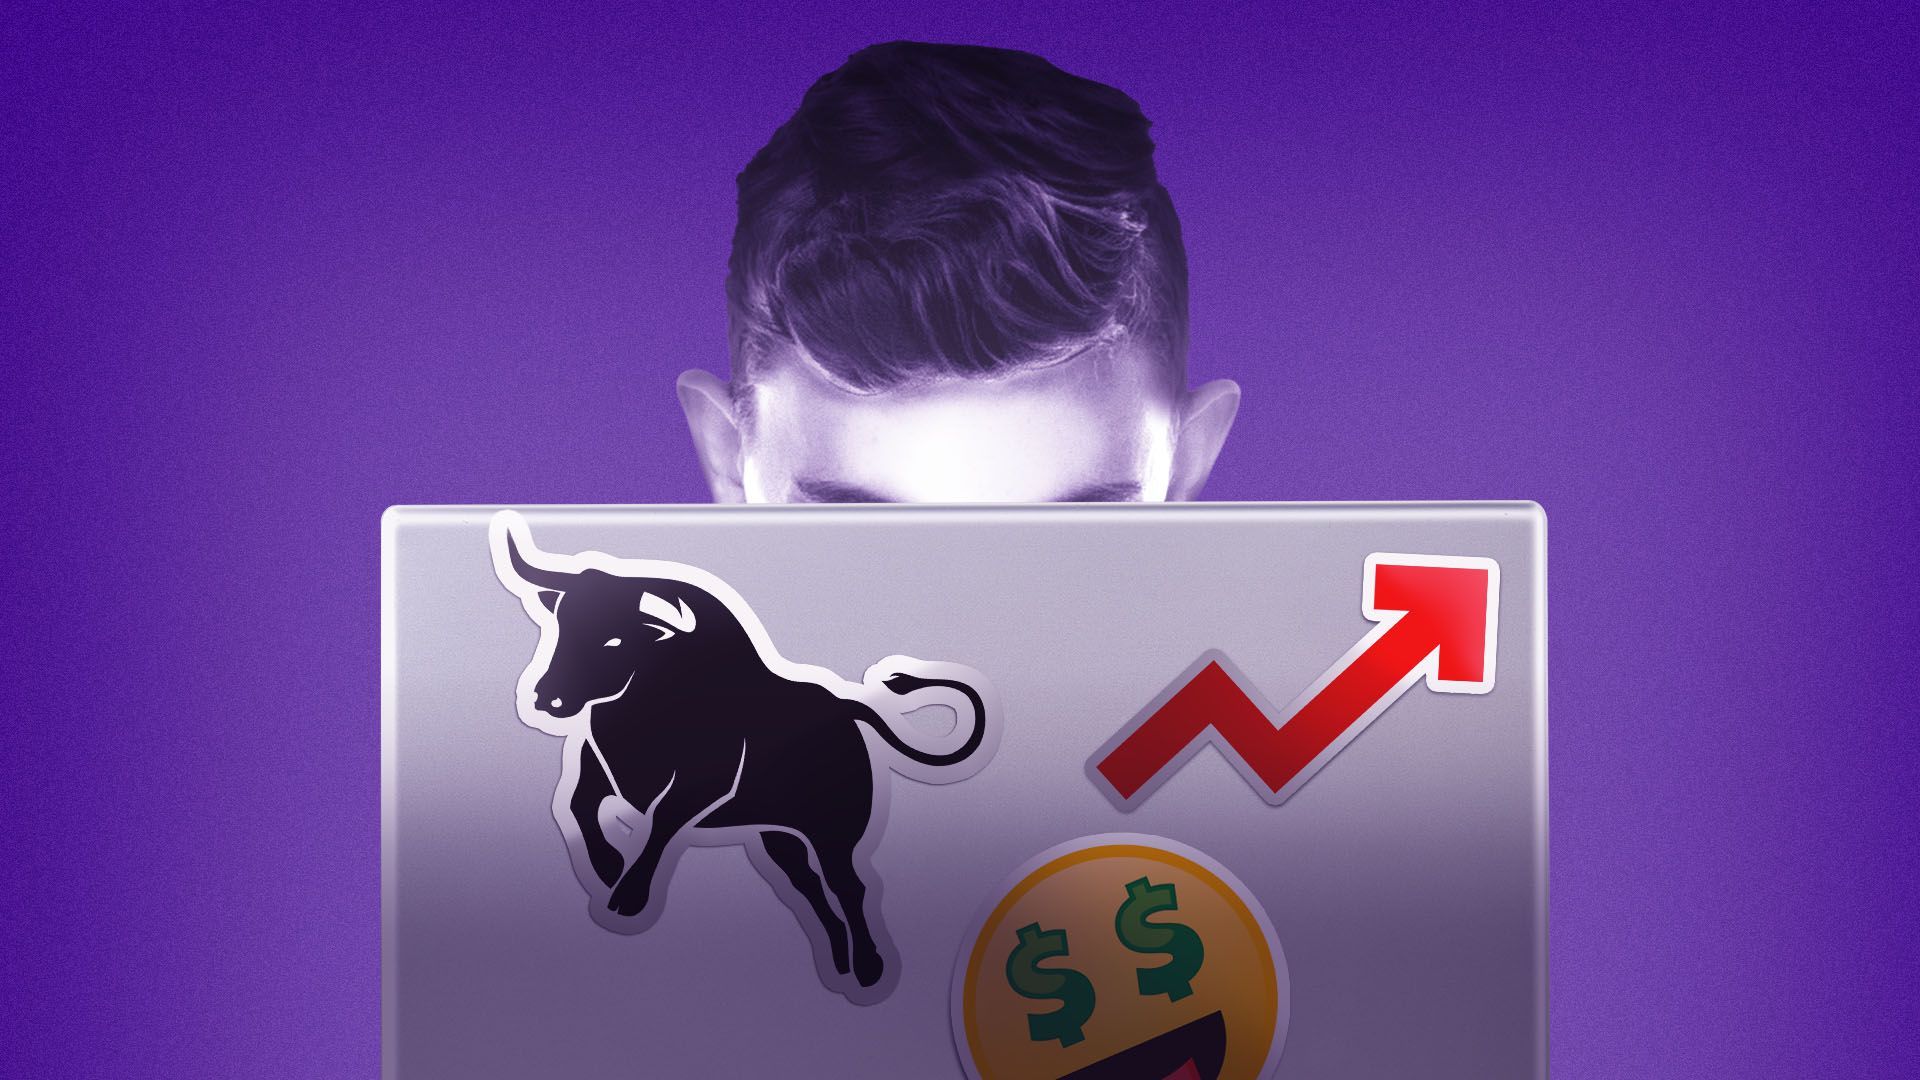 Illustration of a teenager on a laptop covered in wall-street related decals including a bull, a trend line, and an emoji with dollar sign eyes